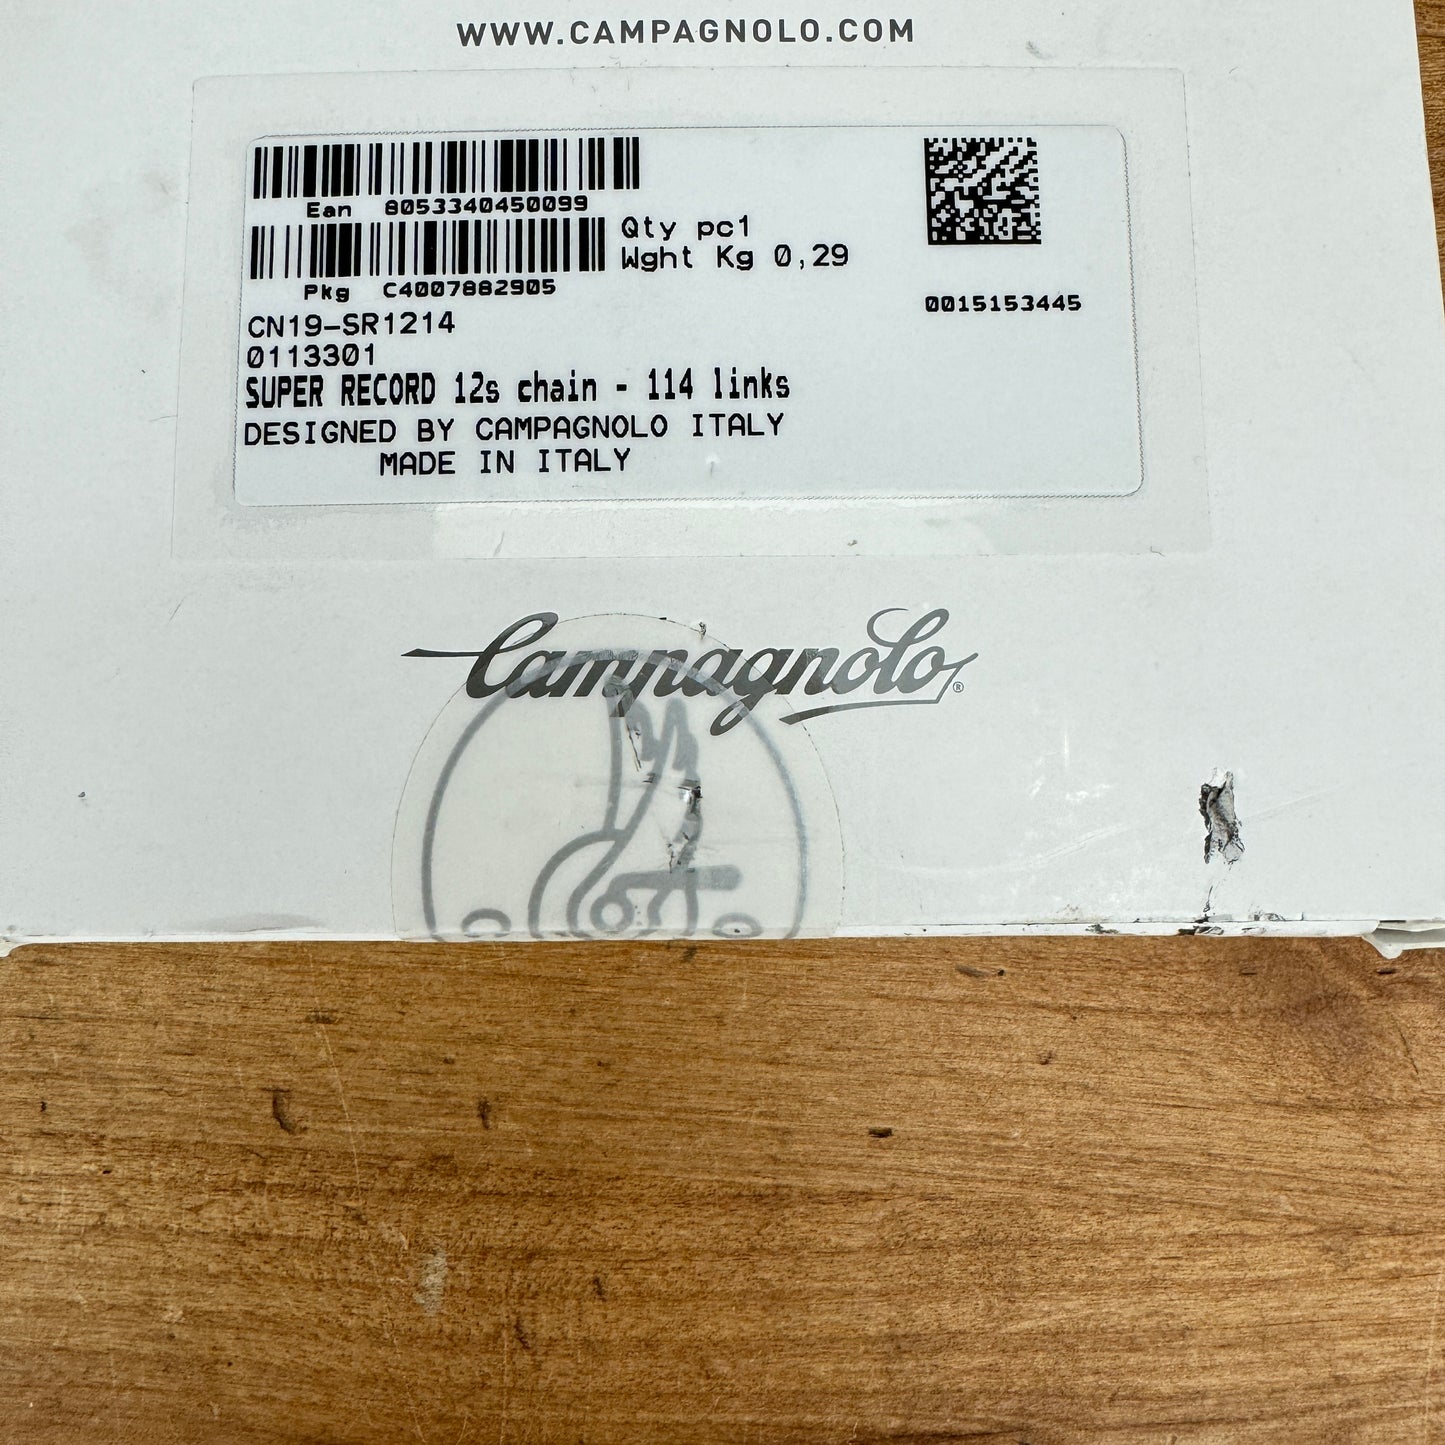 New! Campagnolo Super Record 12-Speed 114 Links Bike Chain